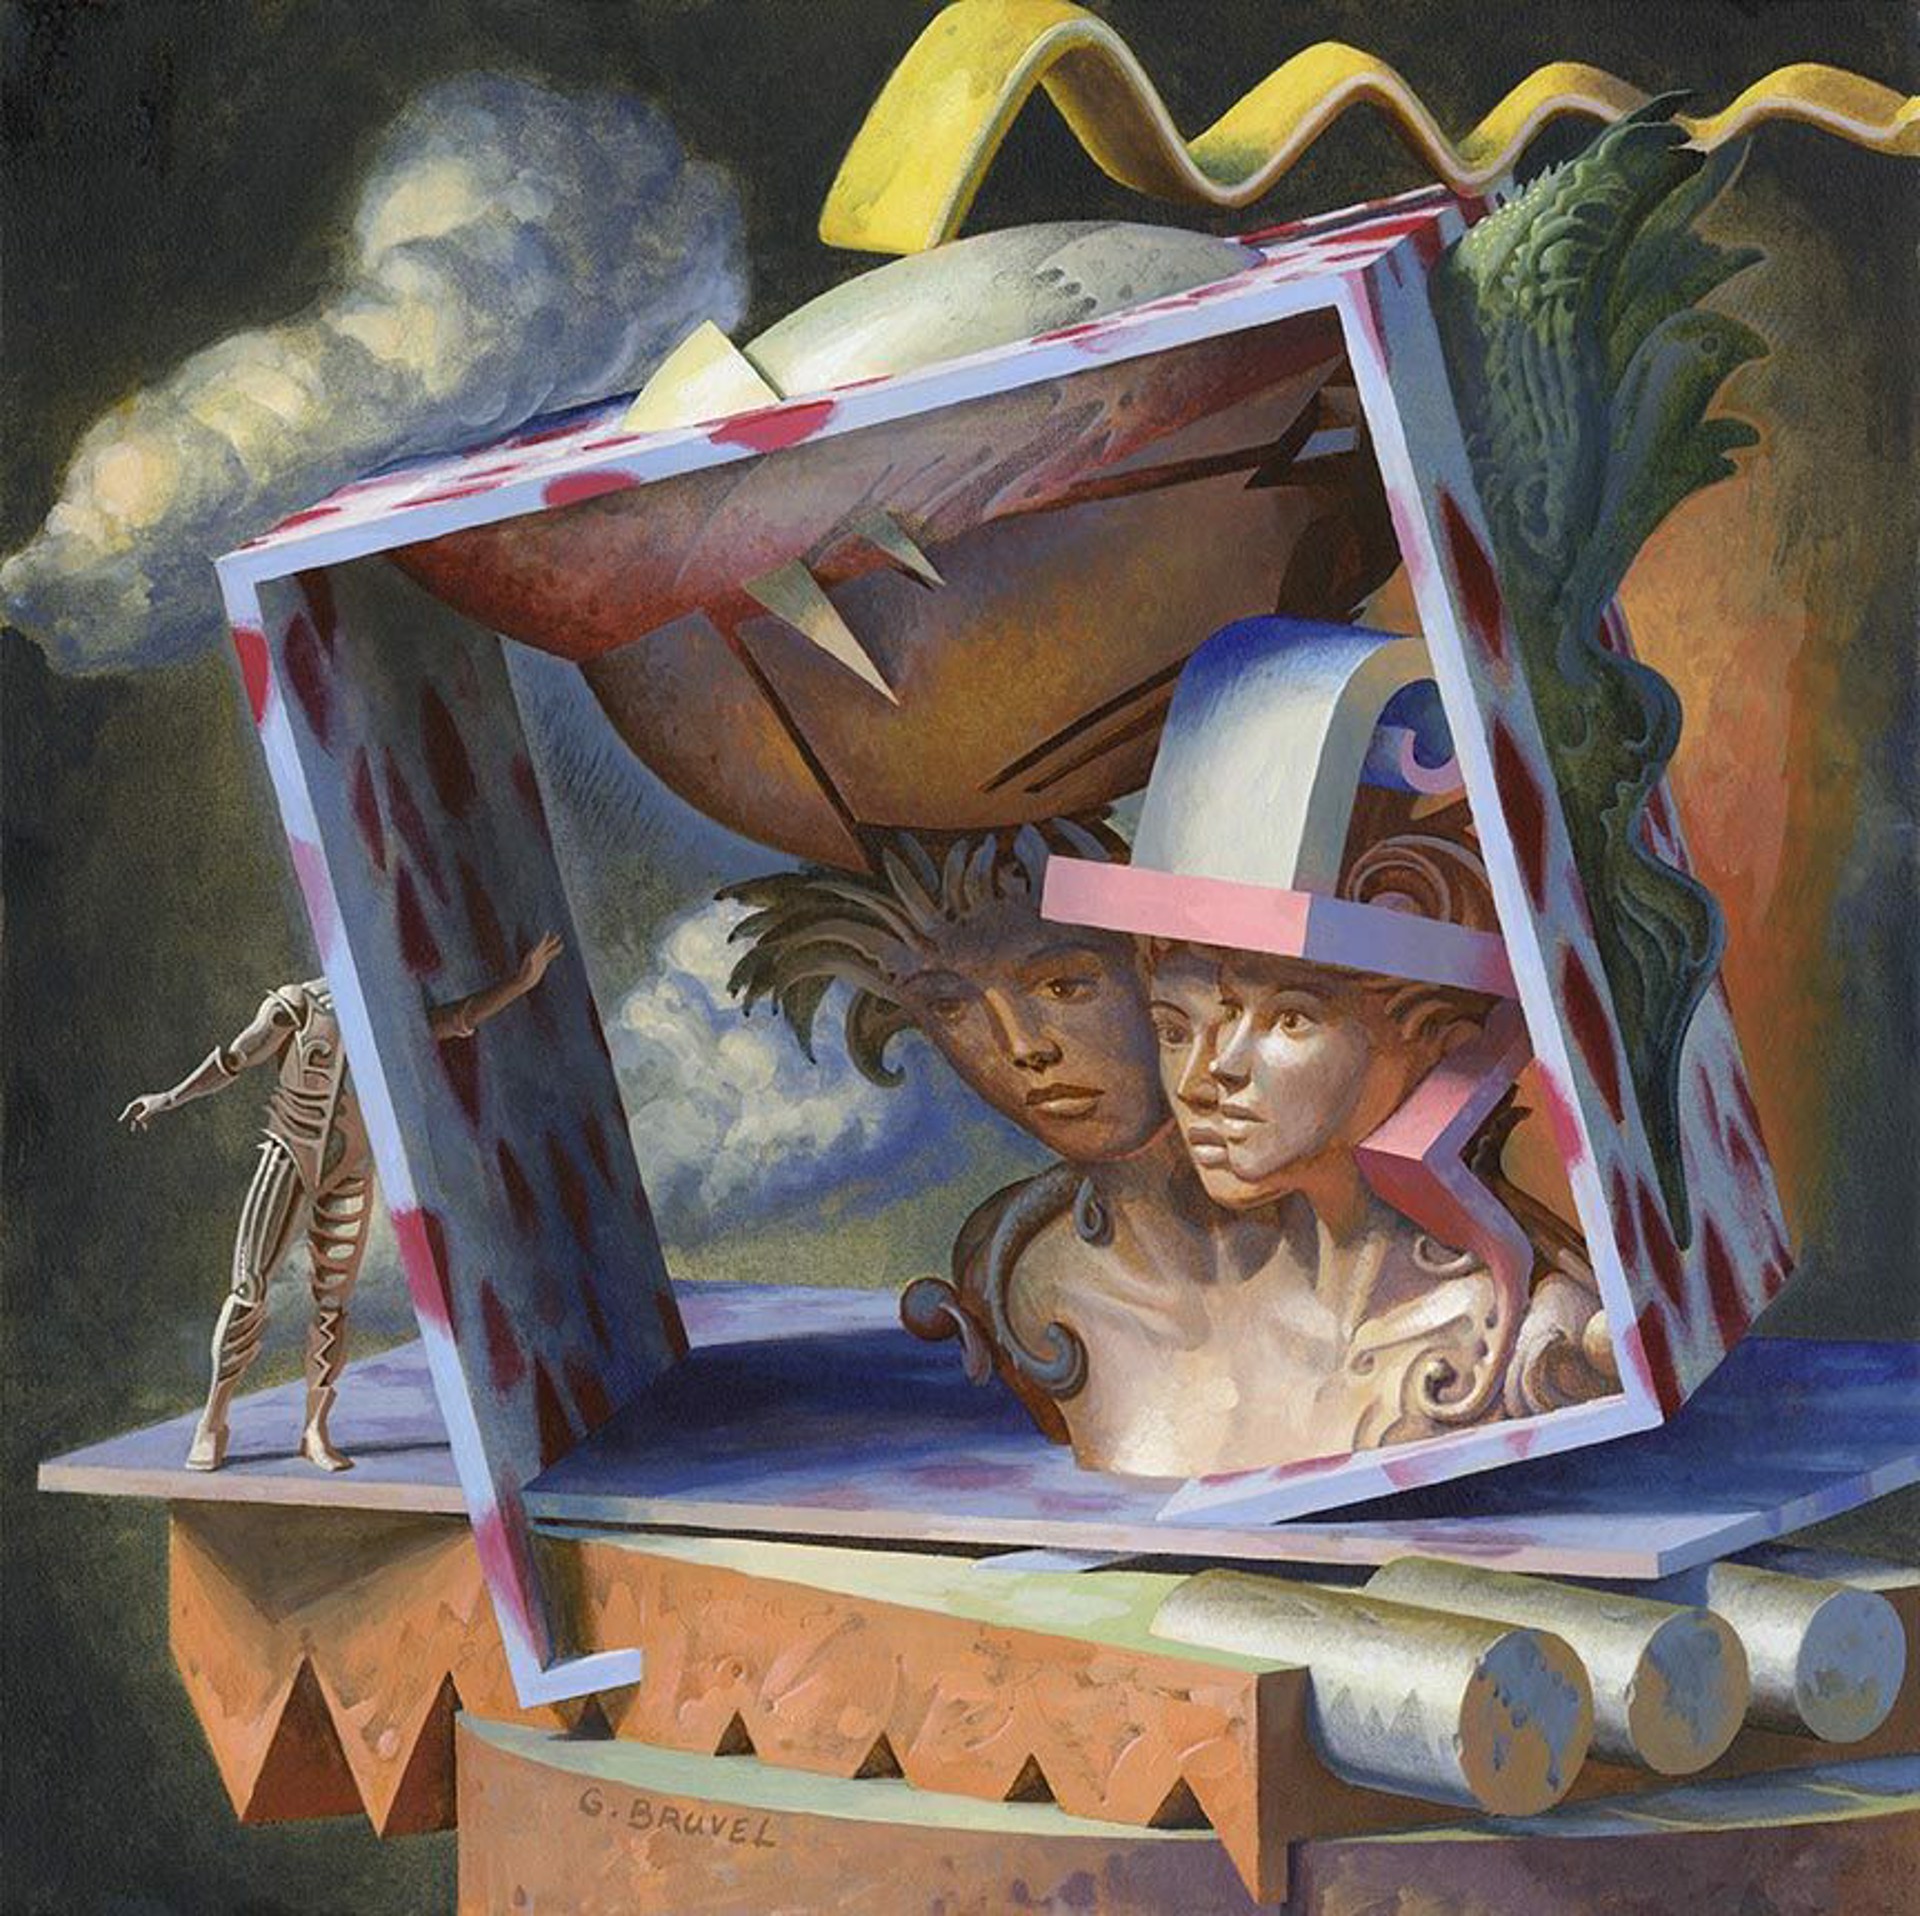 Memory Box by Gil Bruvel